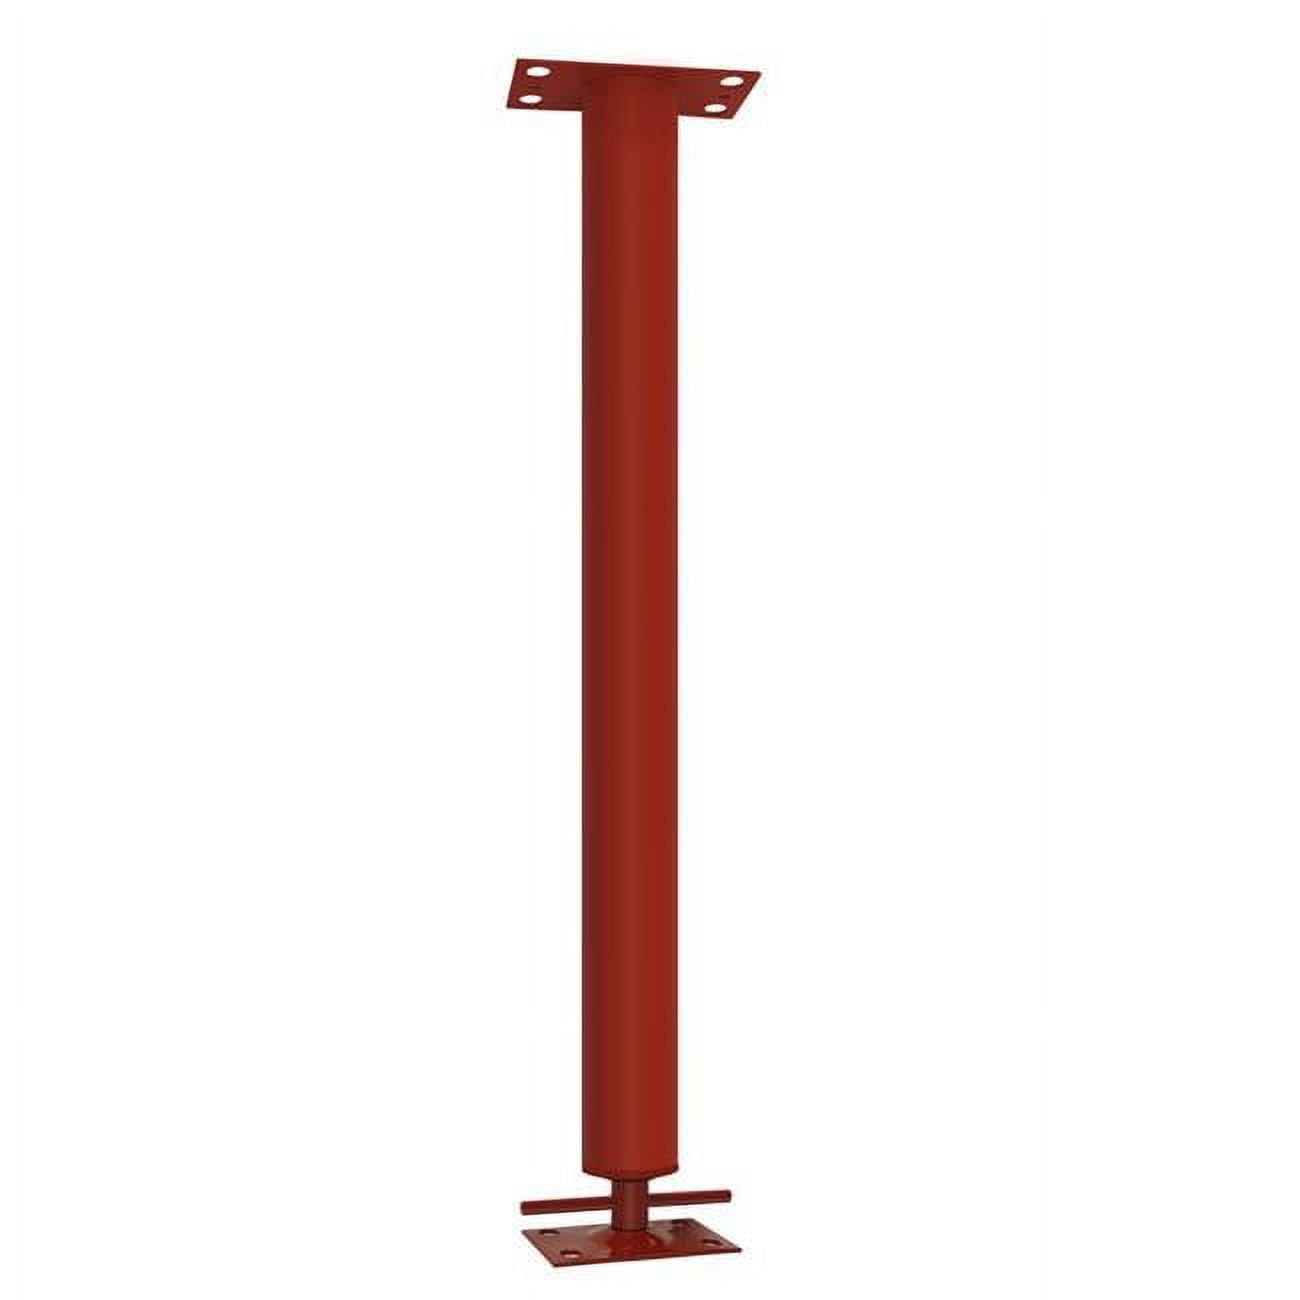 5007295 3 In. Dia. X 2 Ft. Adjustable Building Support Column - 24700 Lbs